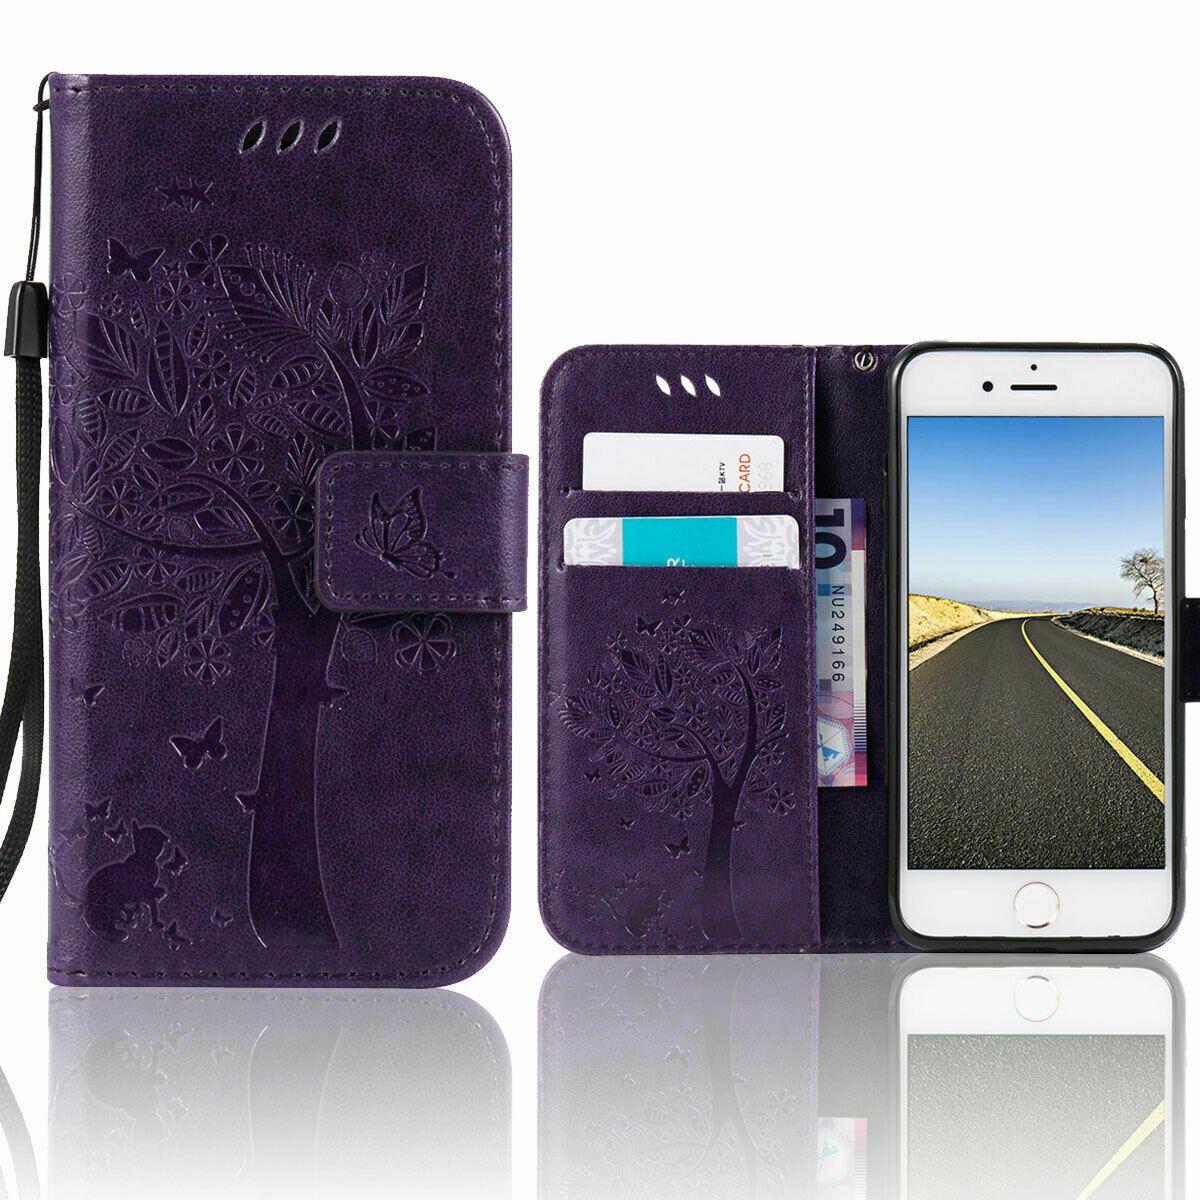 Magnetic Leather Wallet Case For iPhone 8 7 6s Plus X XS MAX XR Flip Cover Stand stekim-92 Purple iPhone6/6S 